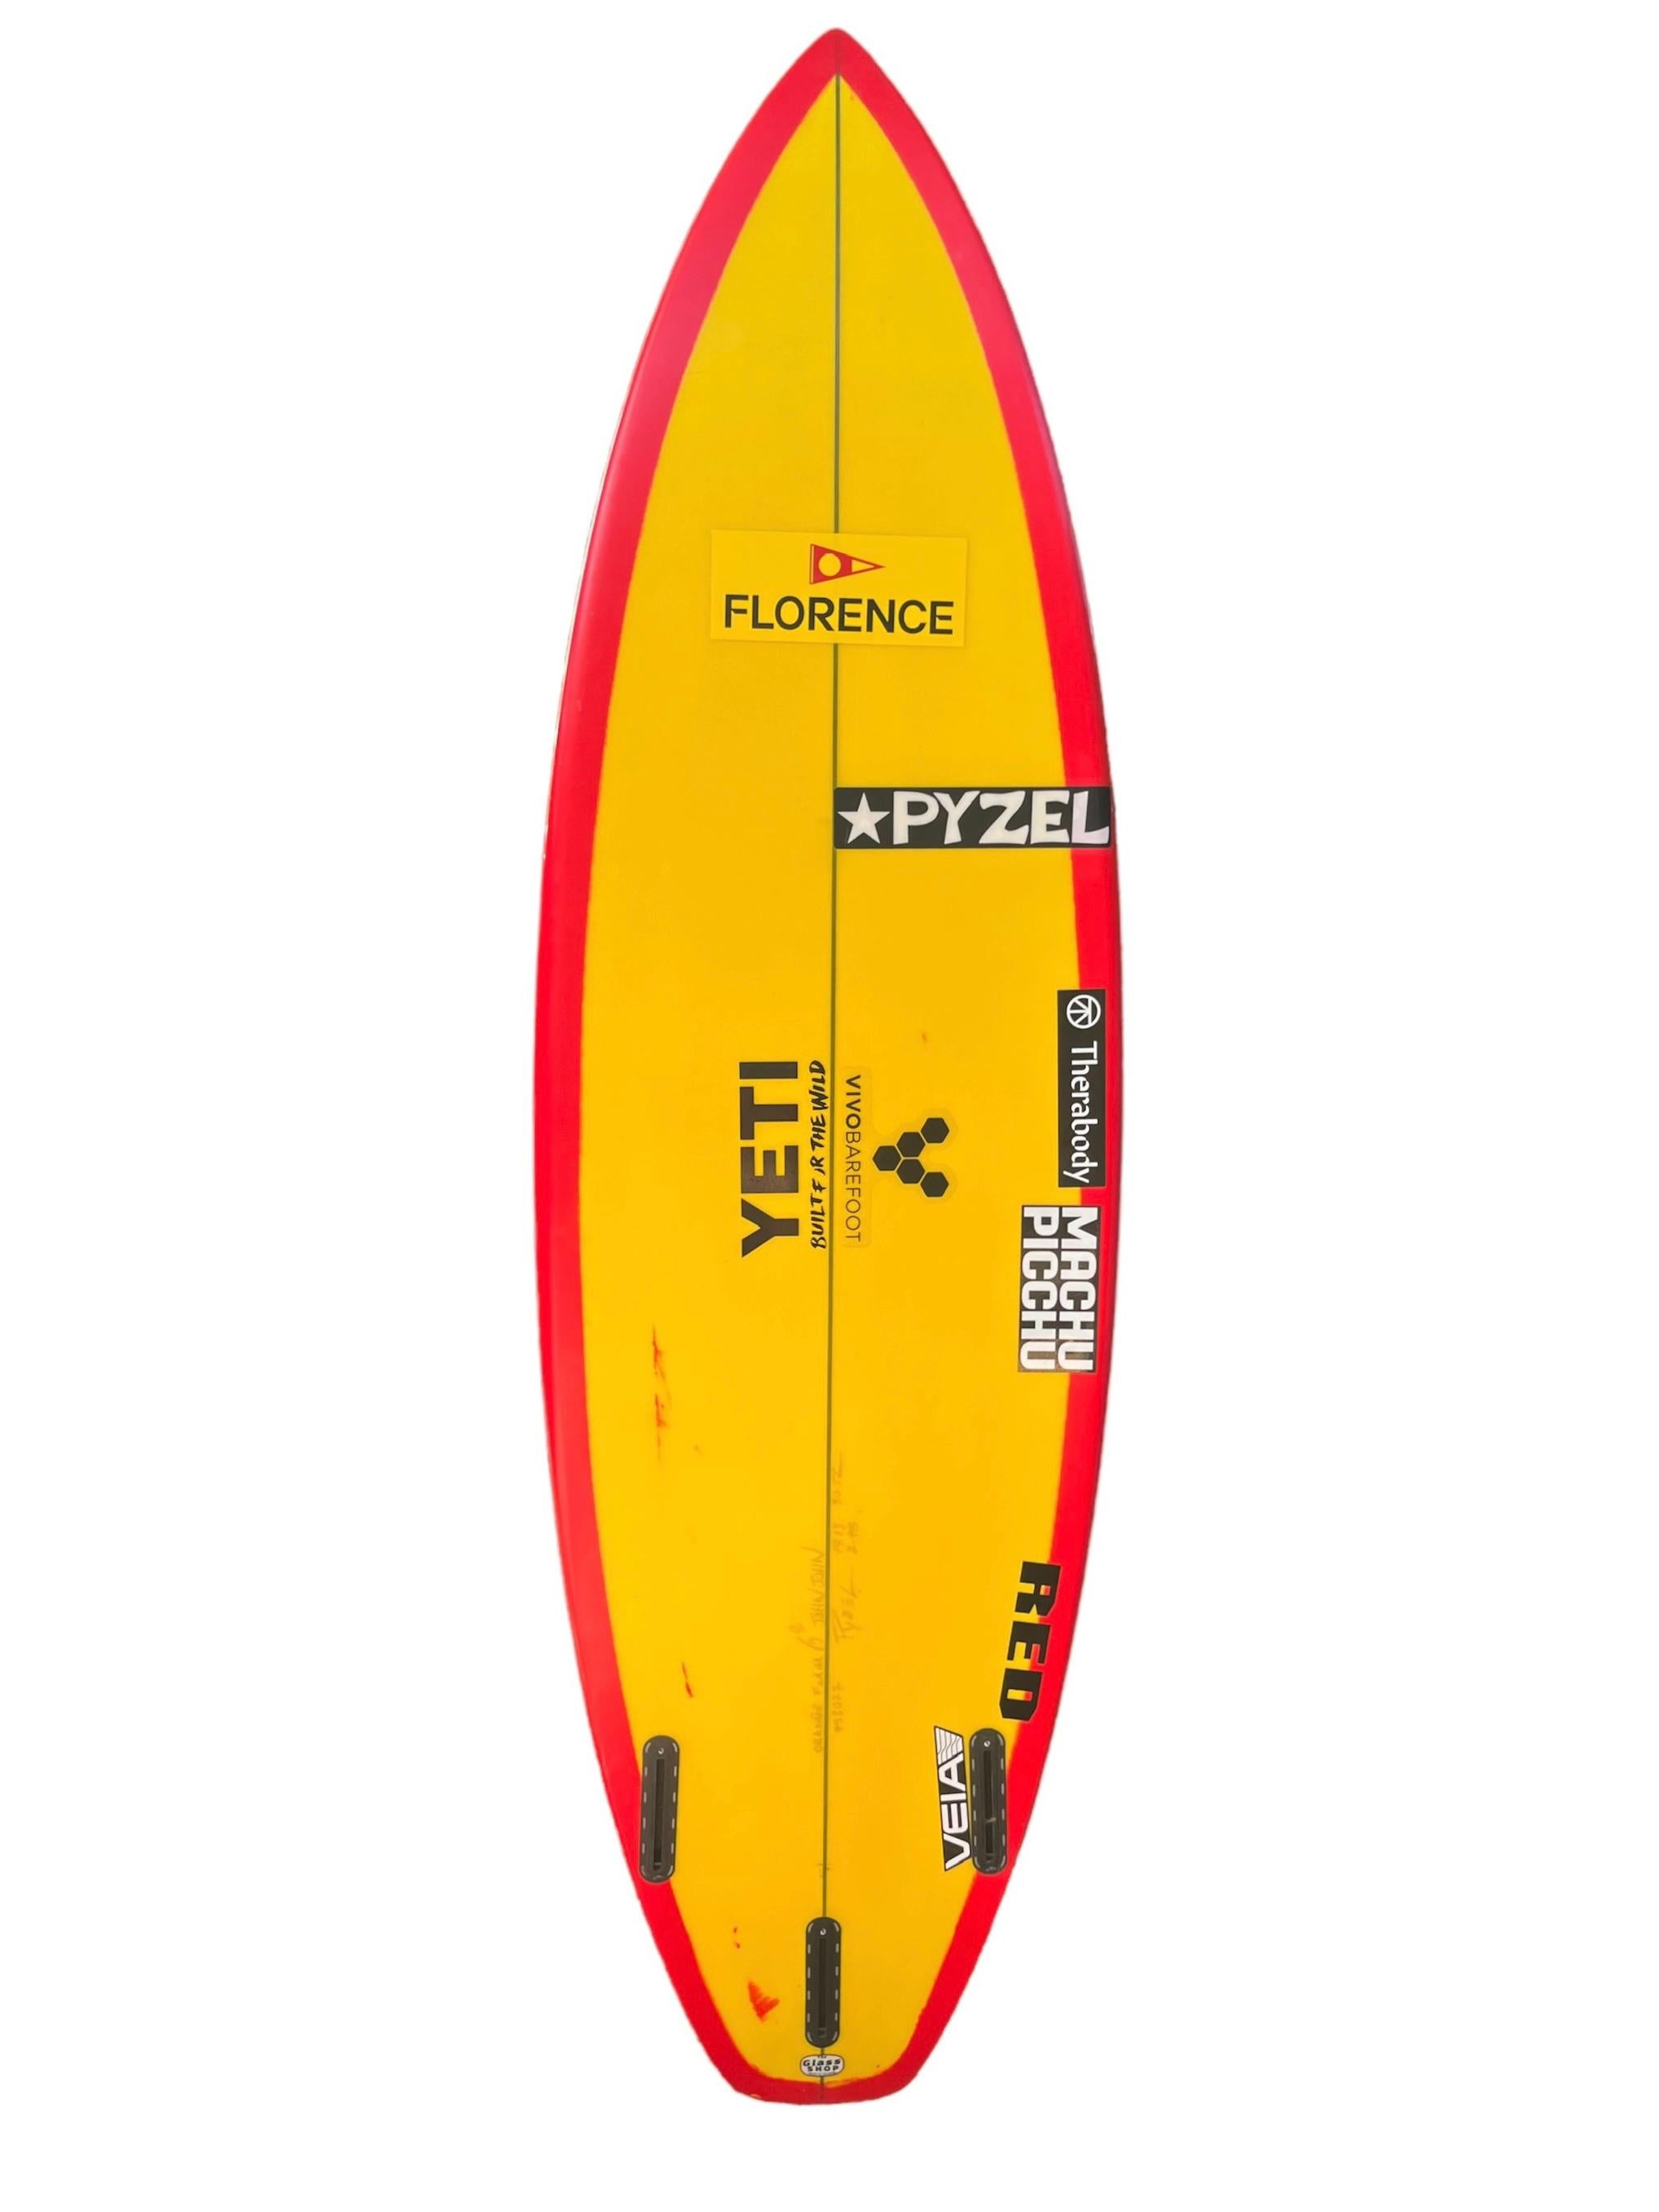 2X World Champion John John Florence’s personal surfboard shaped by Jon Pyzel. Featuring bright red tint/wrapped rails and yellow bottom, squash tail. John John Florence was the 2016 and 2017 WSL World Champion. Florence is one of only four world